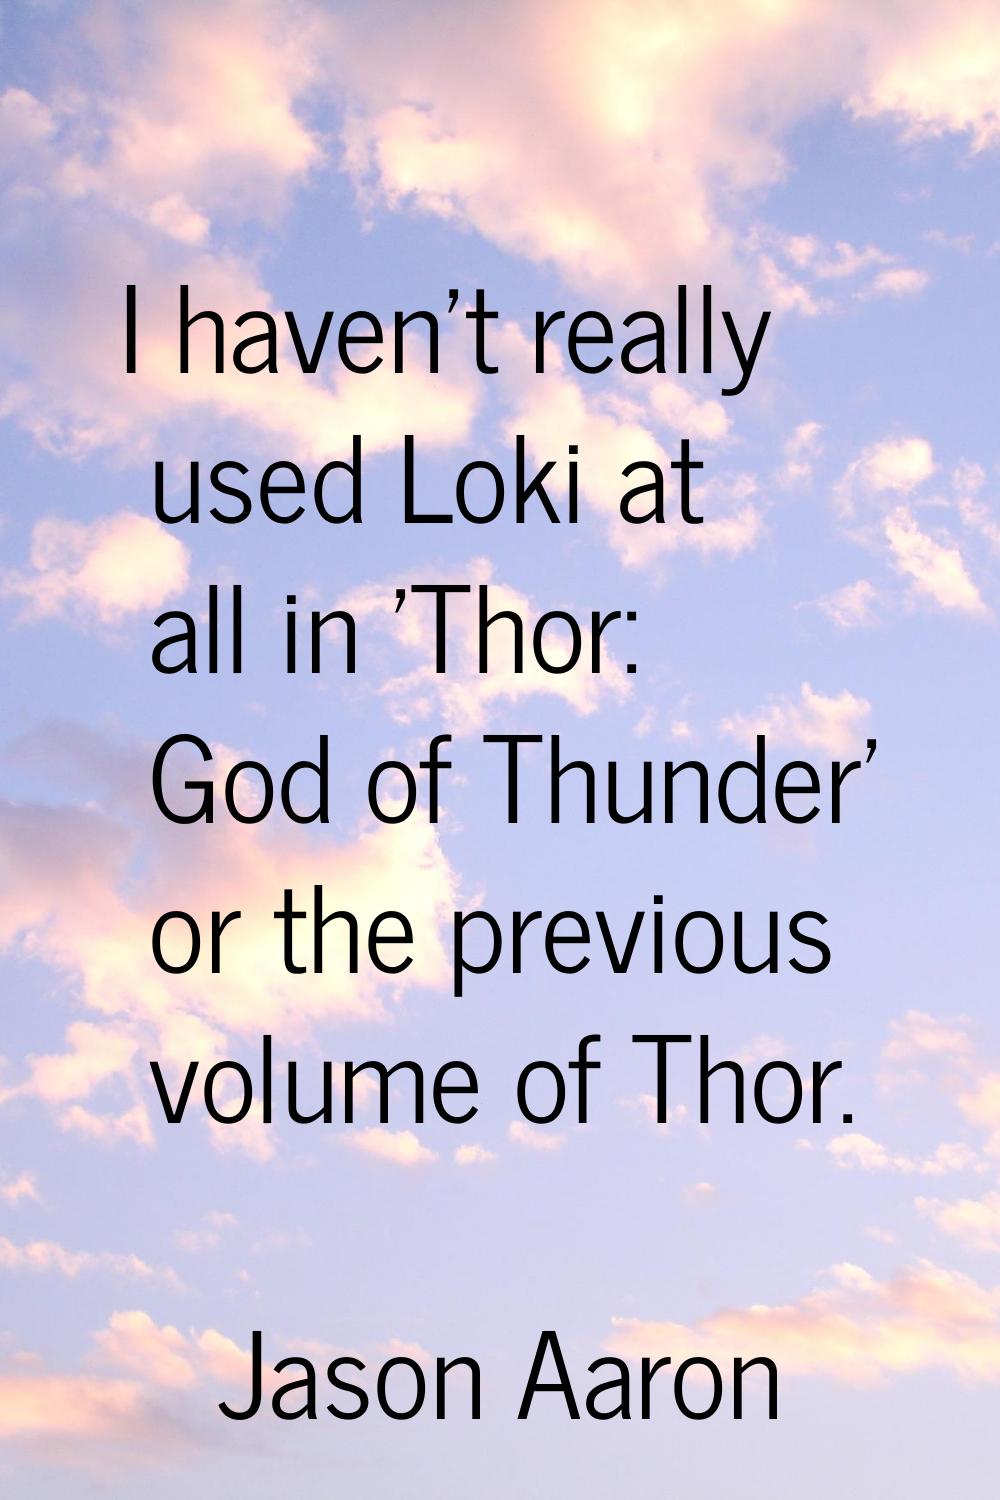 I haven't really used Loki at all in 'Thor: God of Thunder' or the previous volume of Thor.